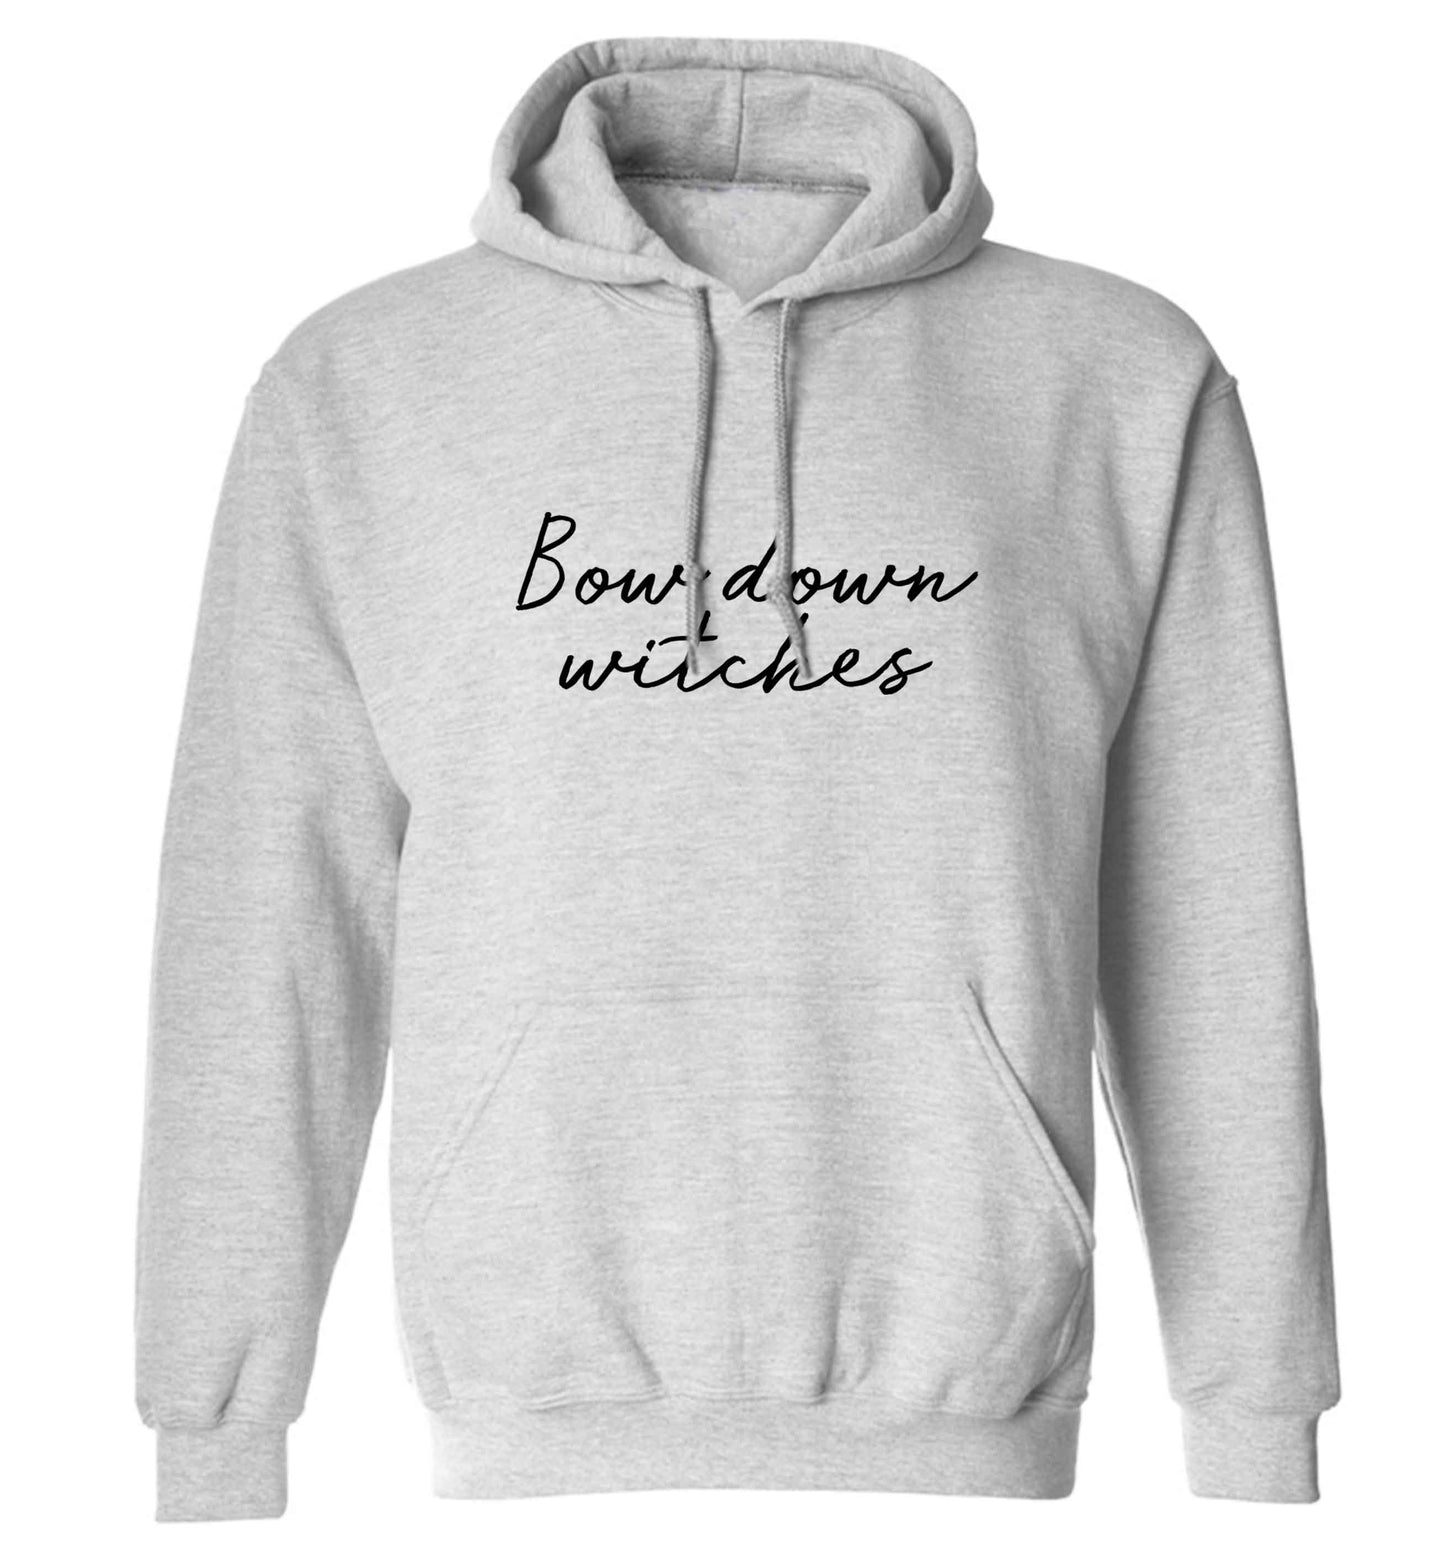 Bow down witches adults unisex grey hoodie 2XL